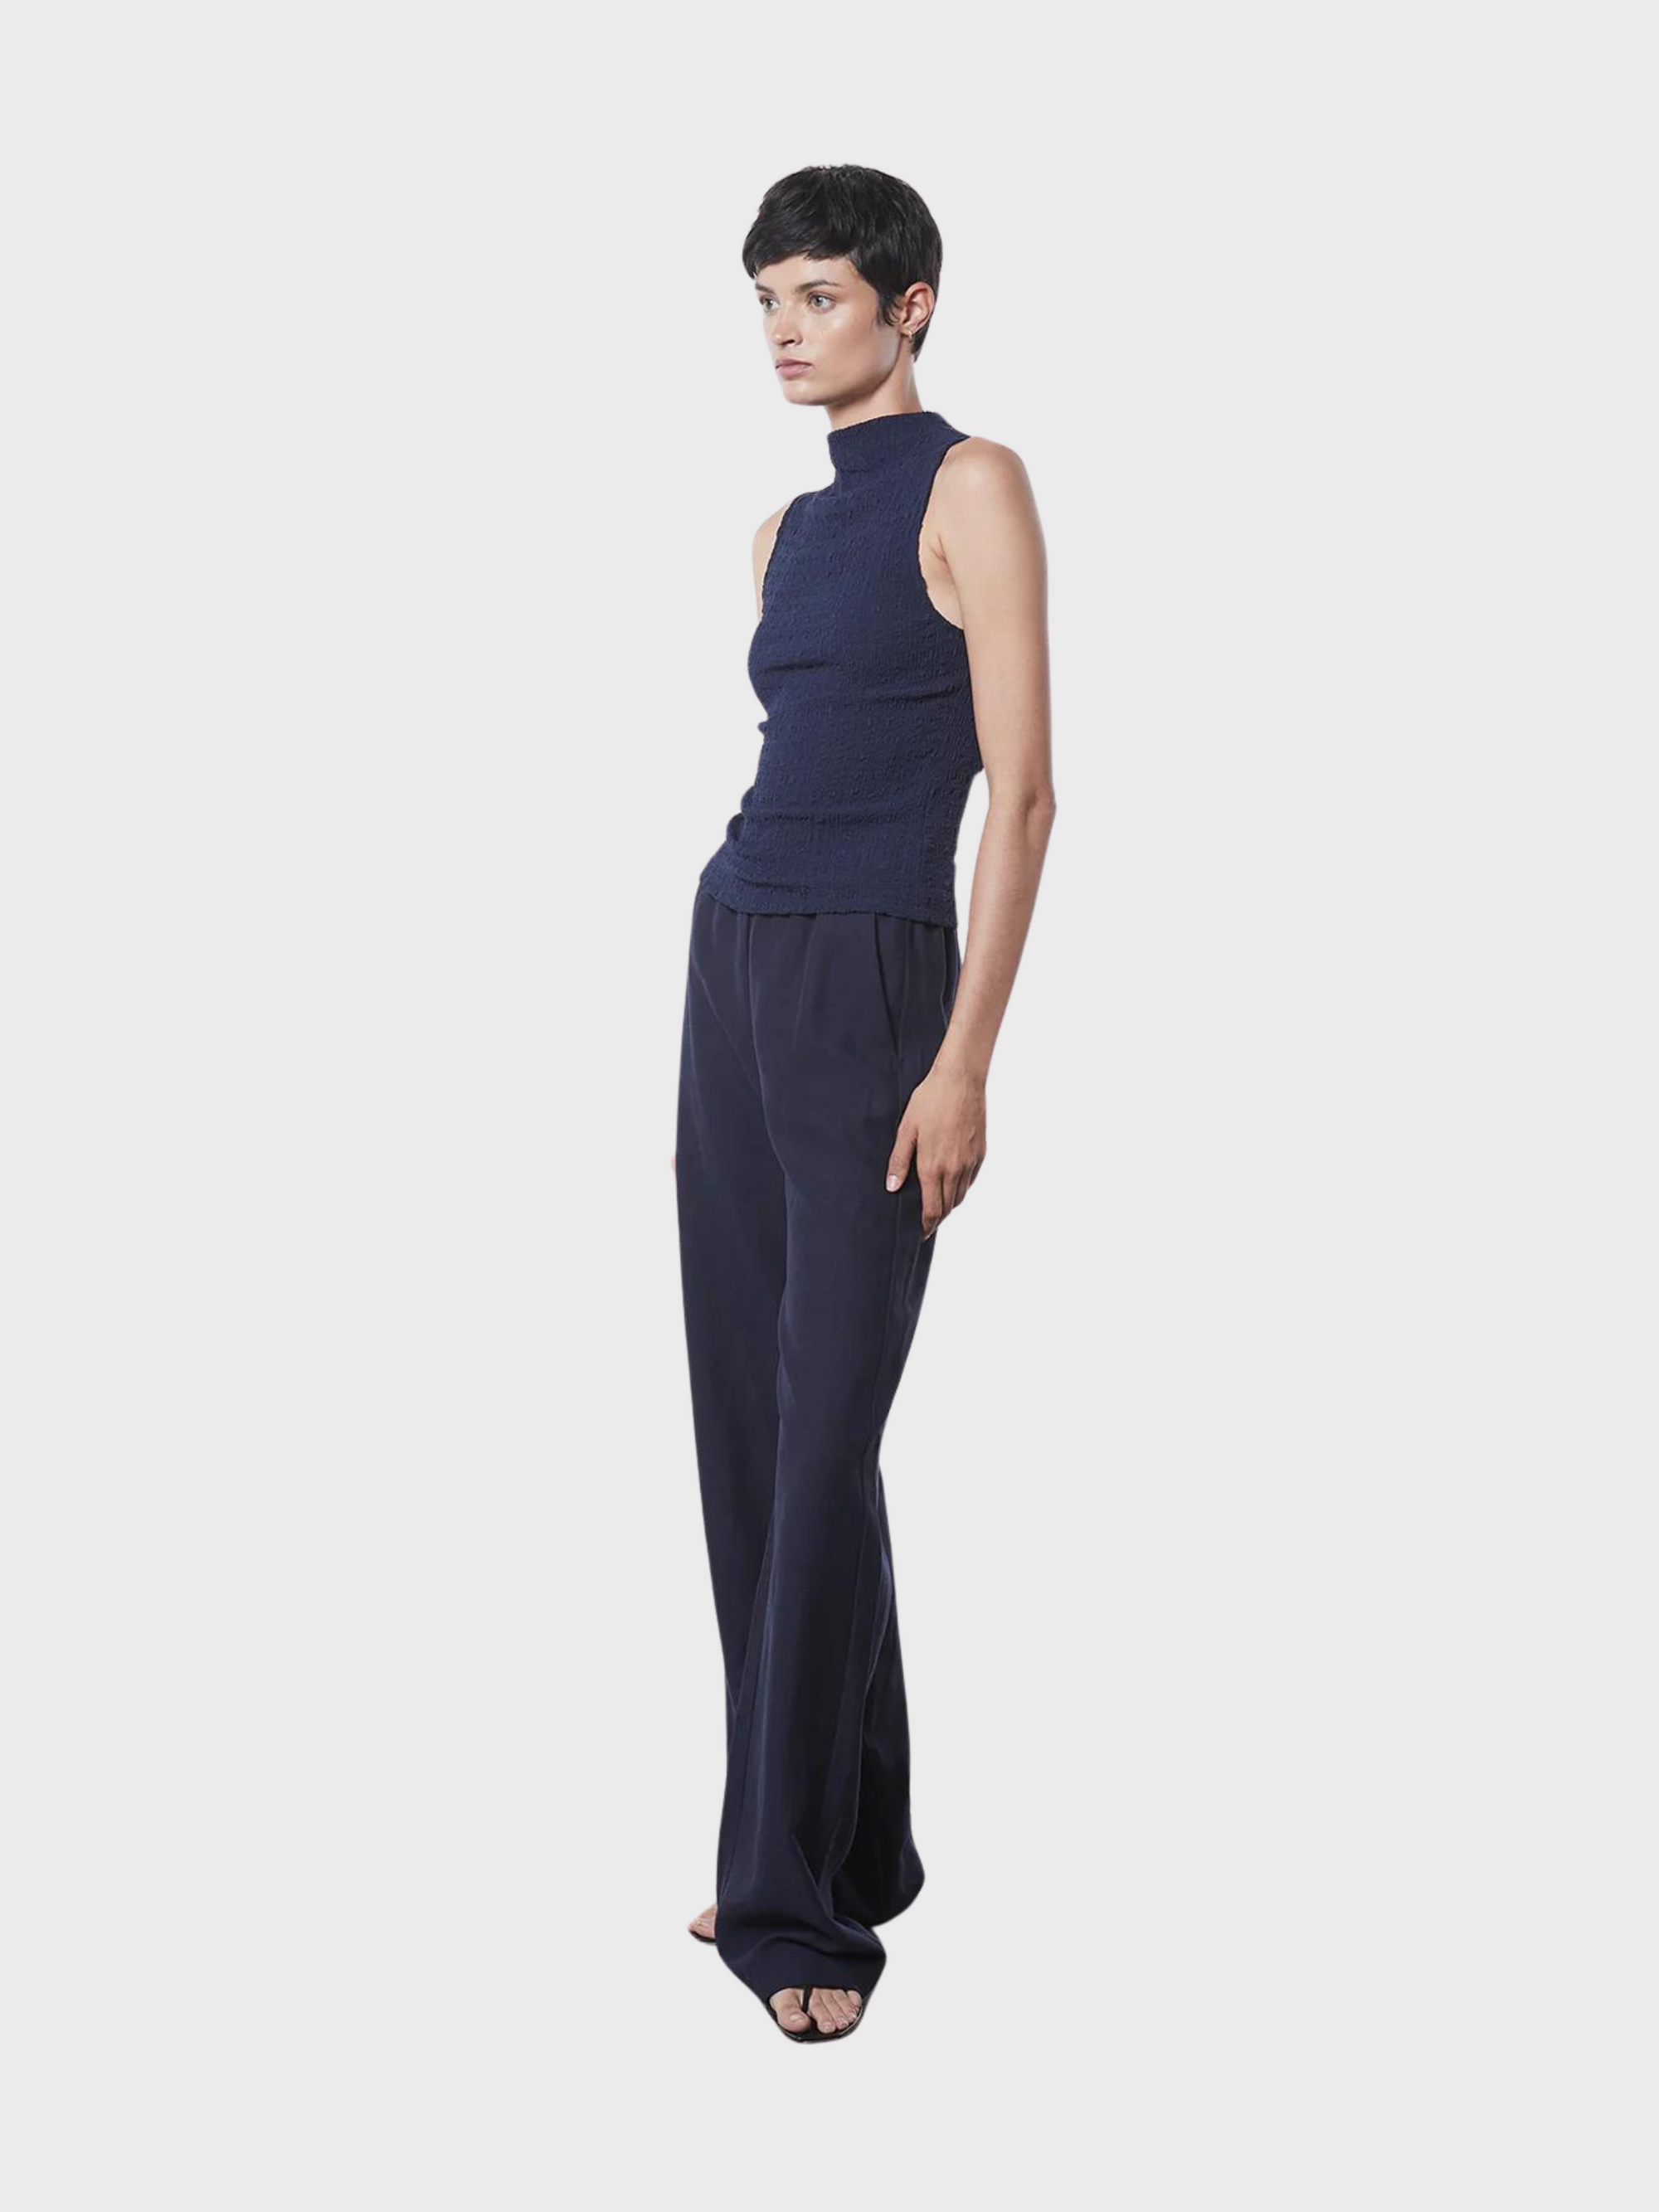 Enza Costa Twill Everywhere Pant Evening Blue-Pants-West of Woodward Boutique-Vancouver-Canada